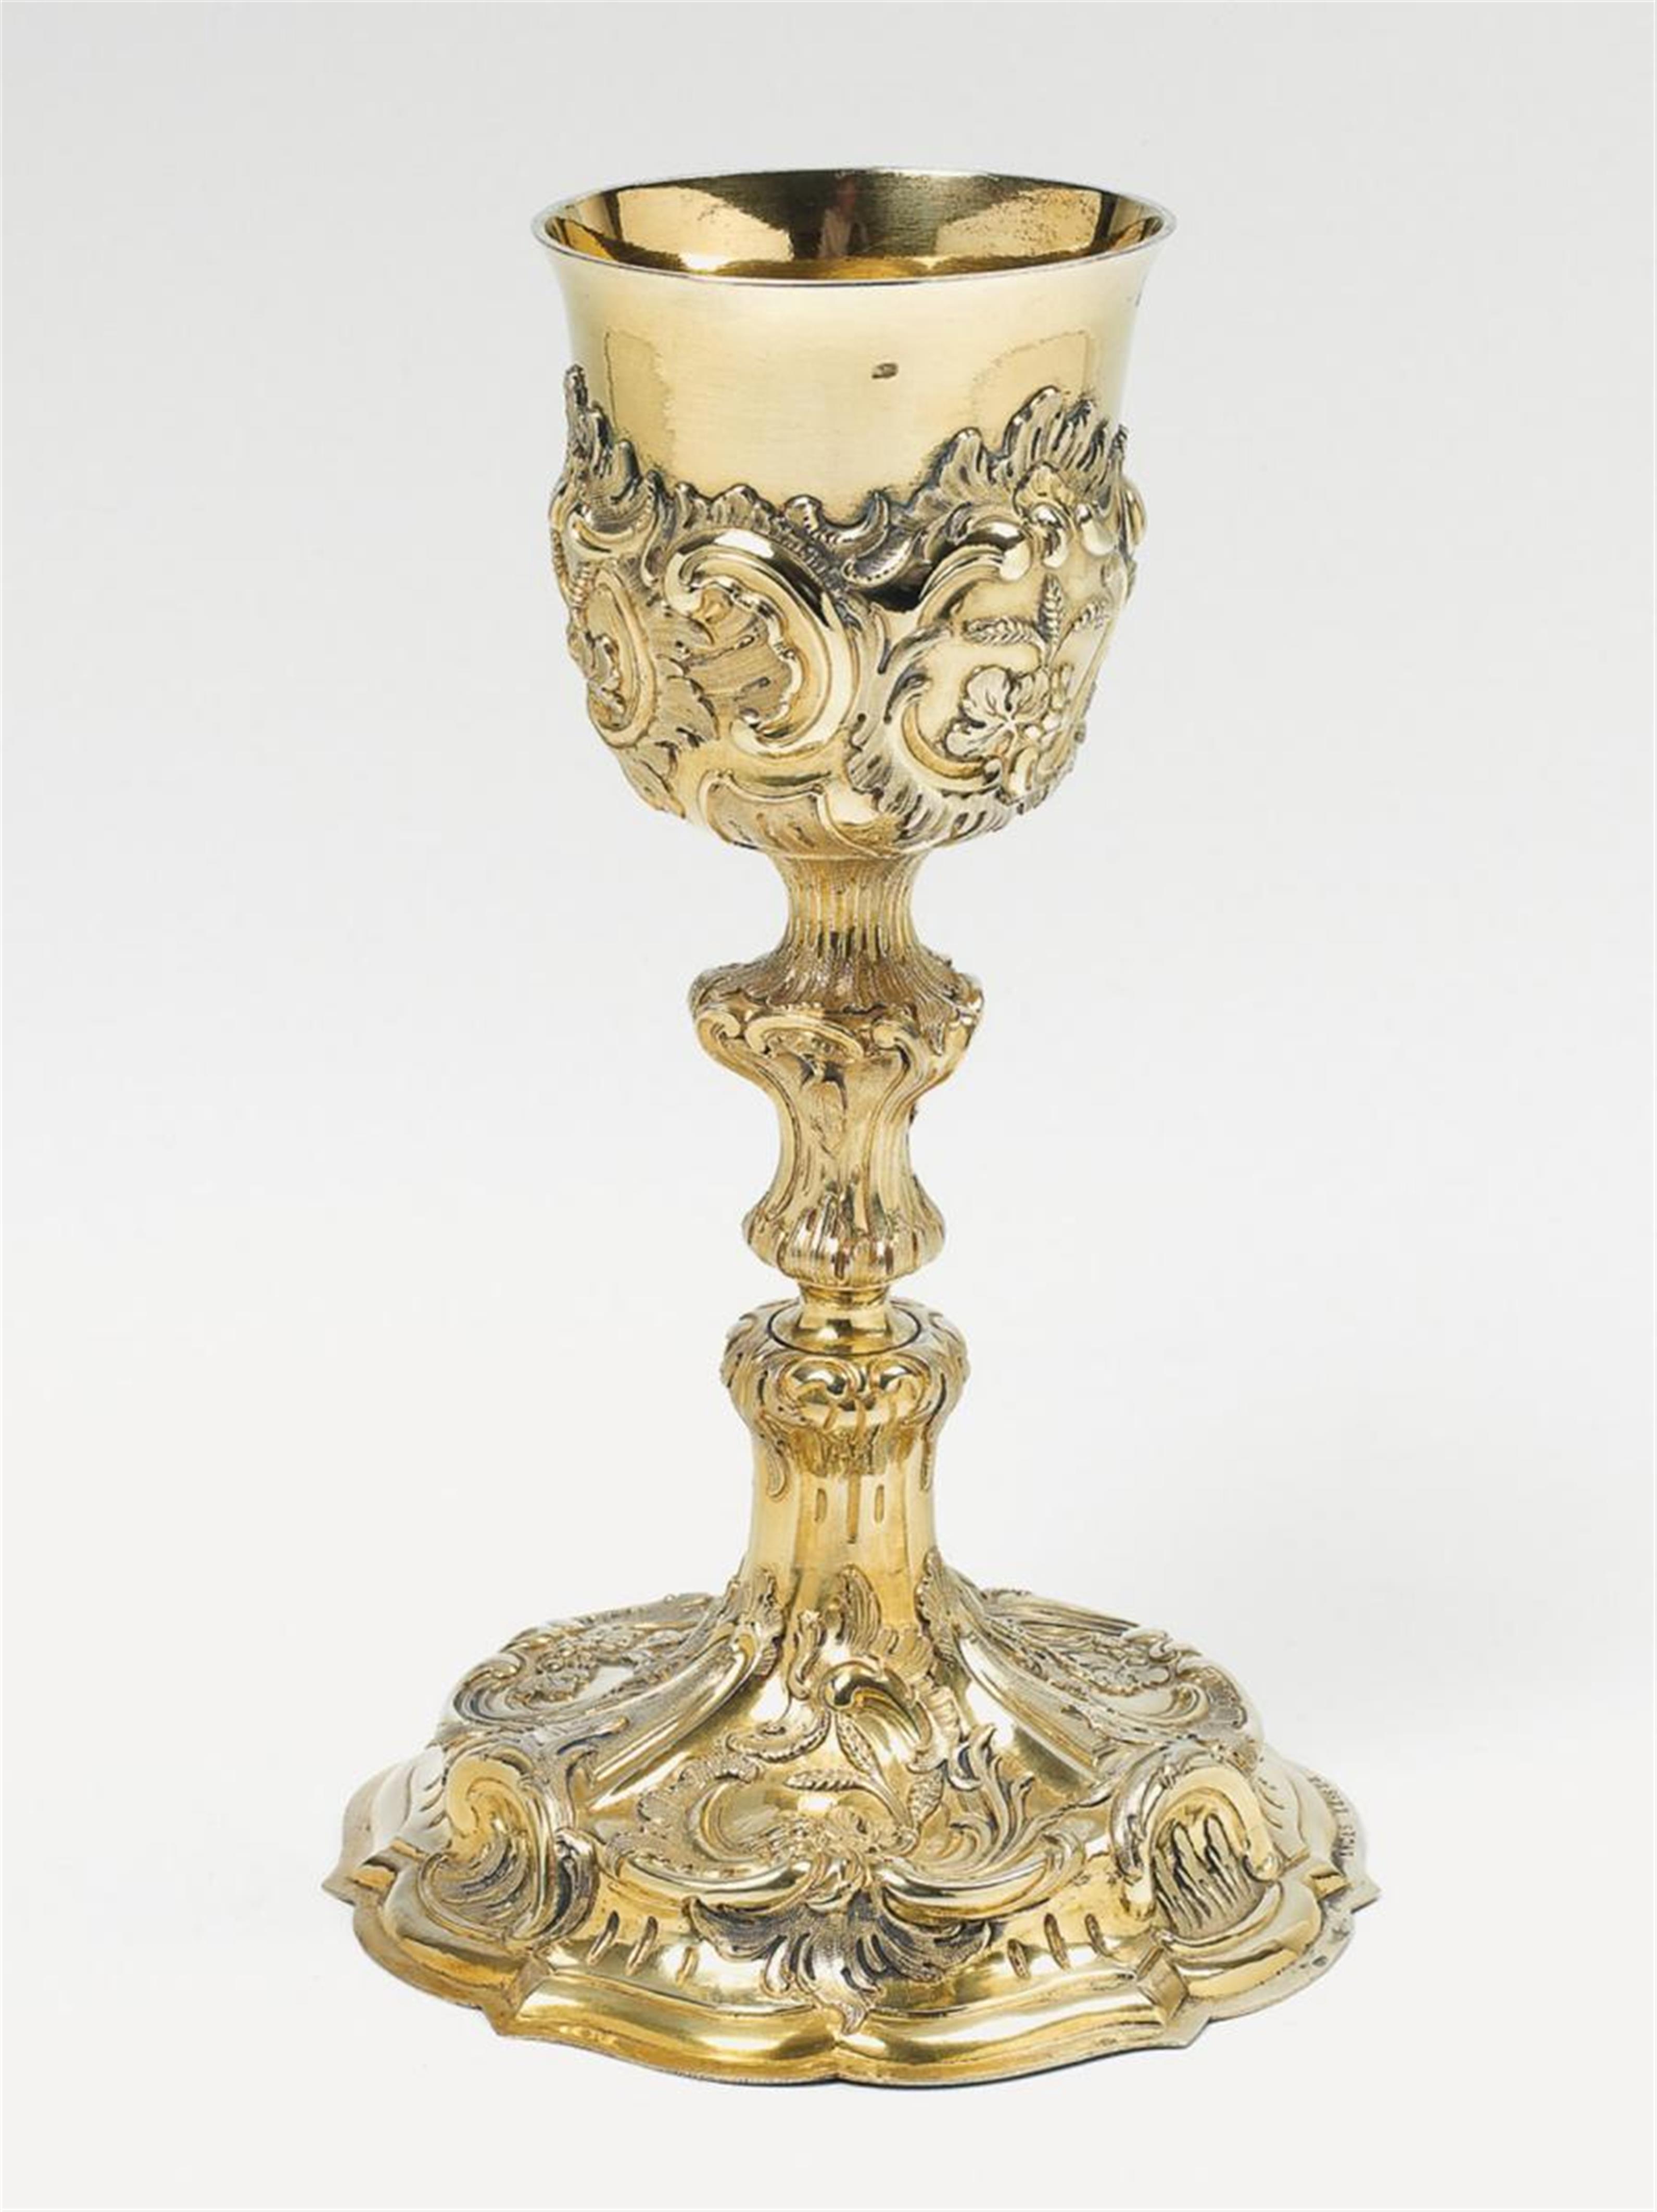 A silver partially gilt communion chalice. Engraved dedication "LVCAS LESSER 1763". Included a paten. Unmarked, probably Laibach / Carniola, ca. 1760. - image-1